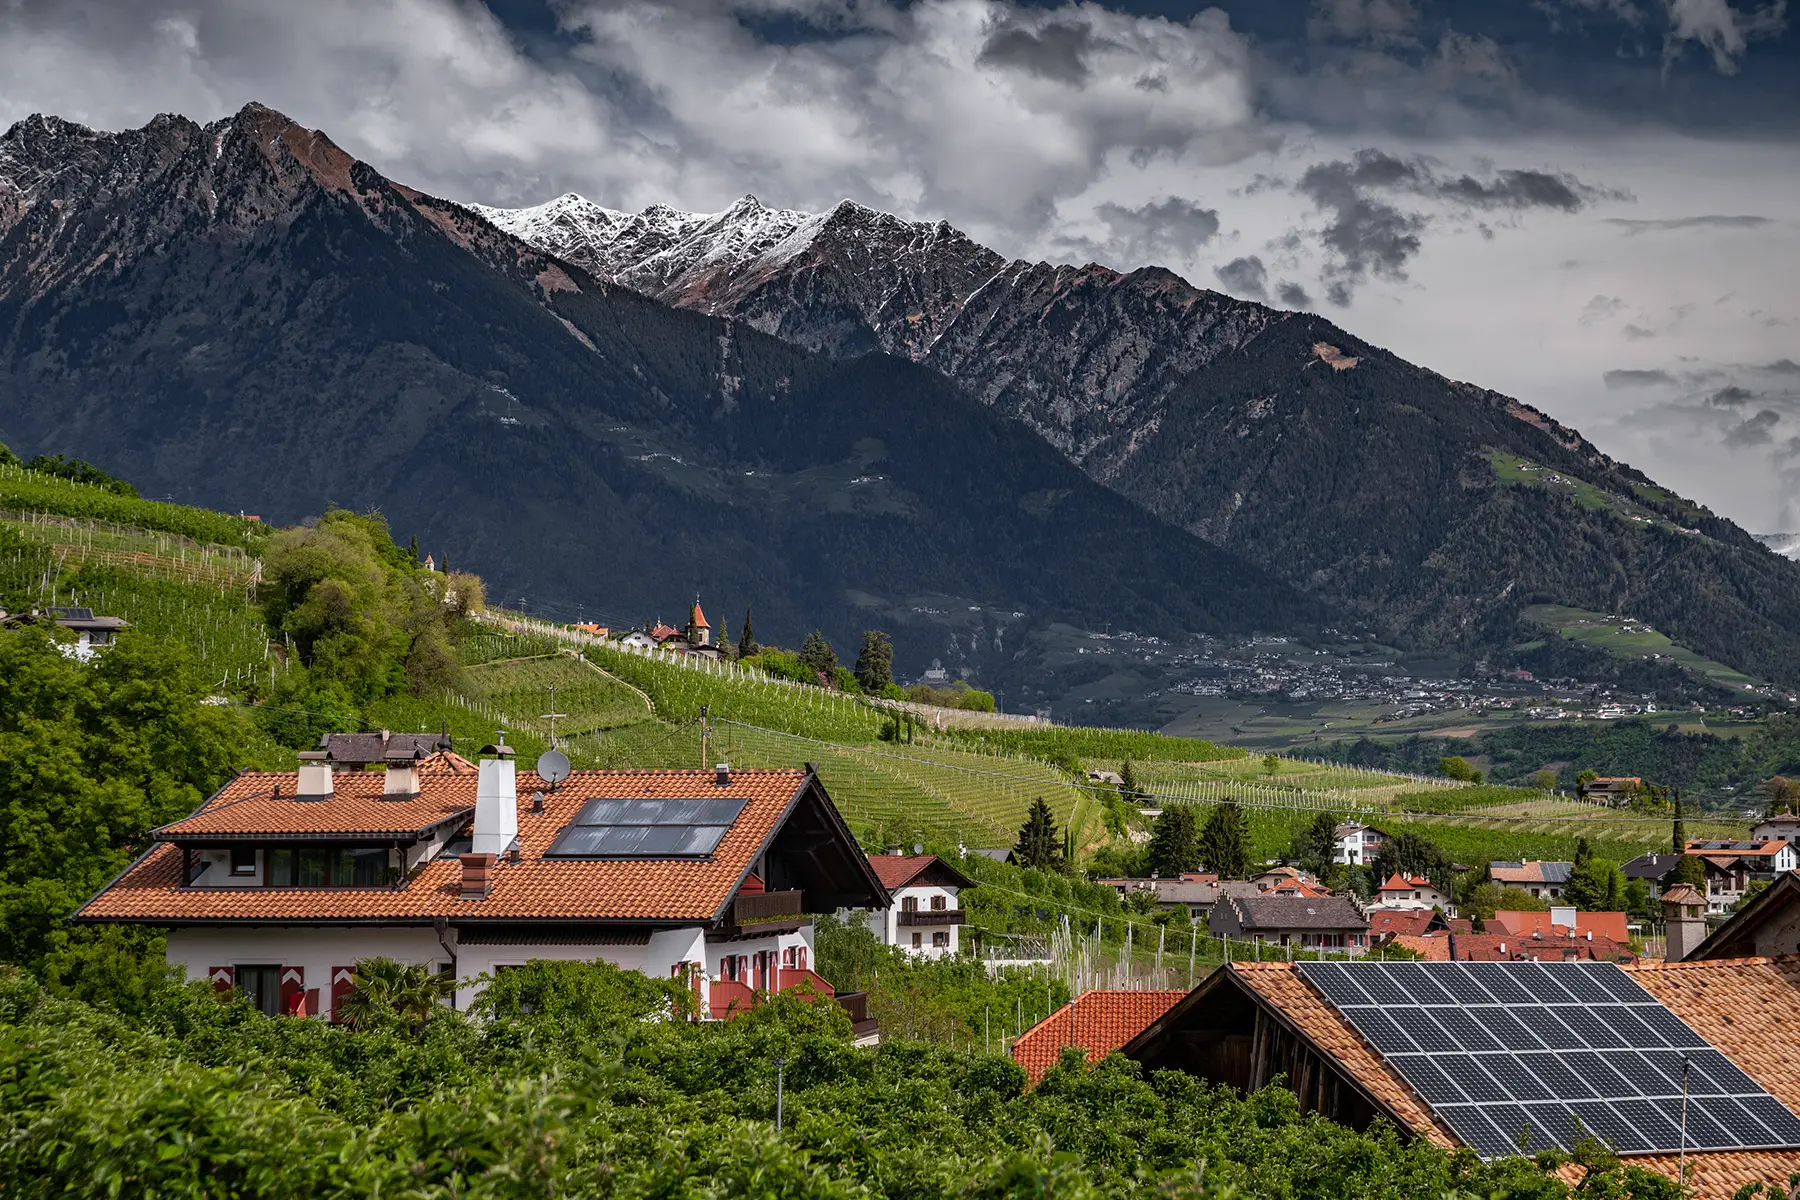 Solar panels on houses in the Dolomites in Italy